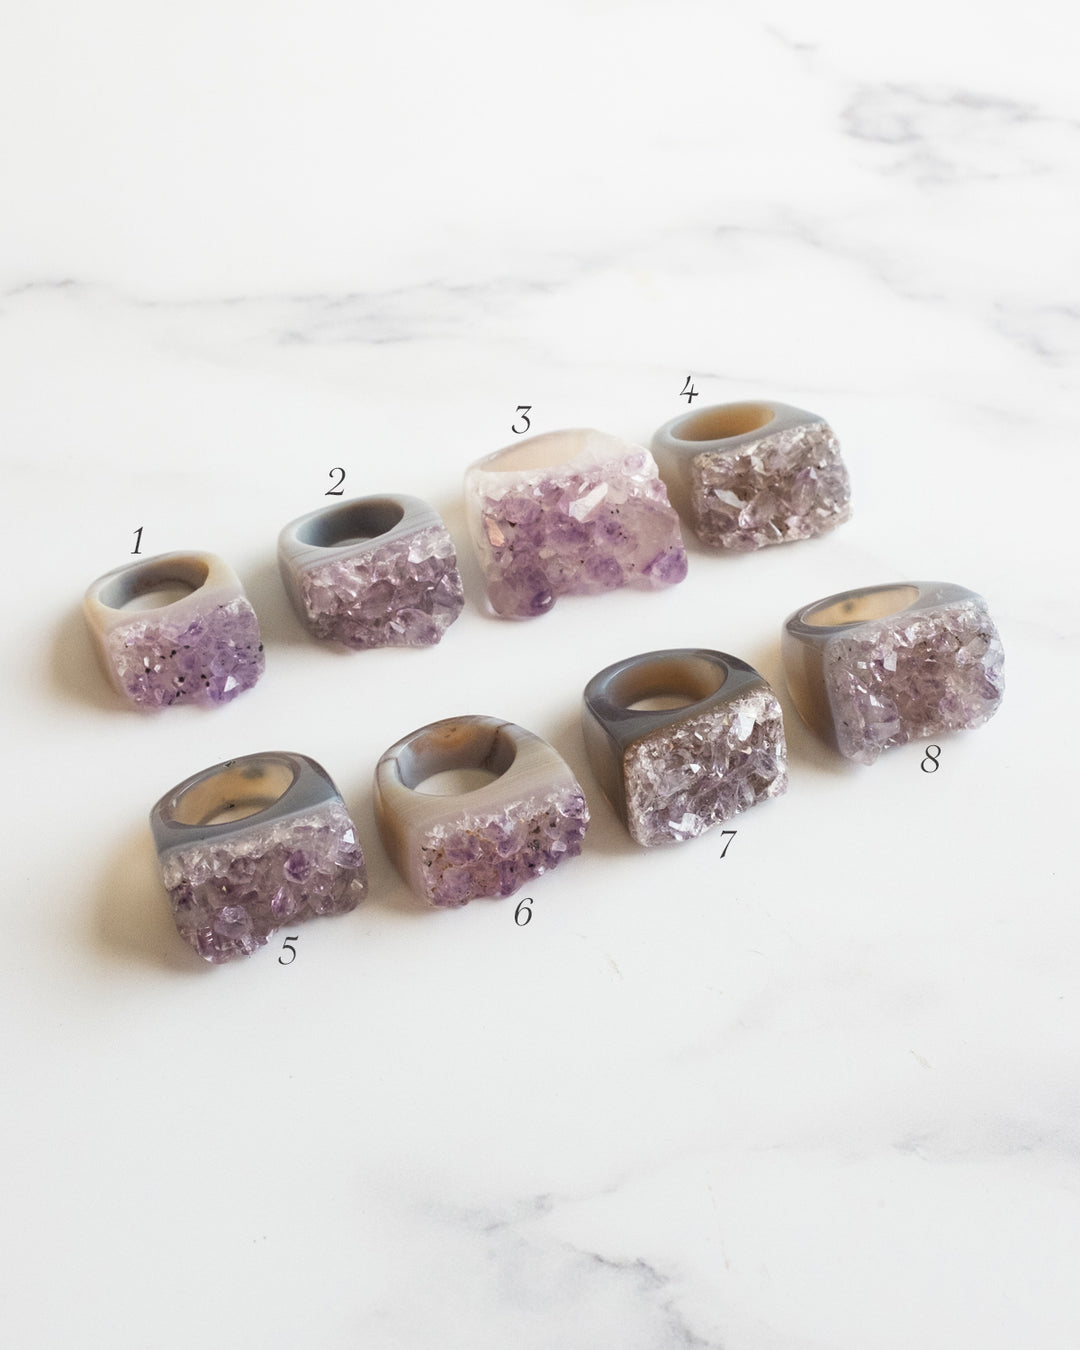 Raw Amethyst Ring - Size 7 1/4 US / O 1/2 UK - The Healing Pear